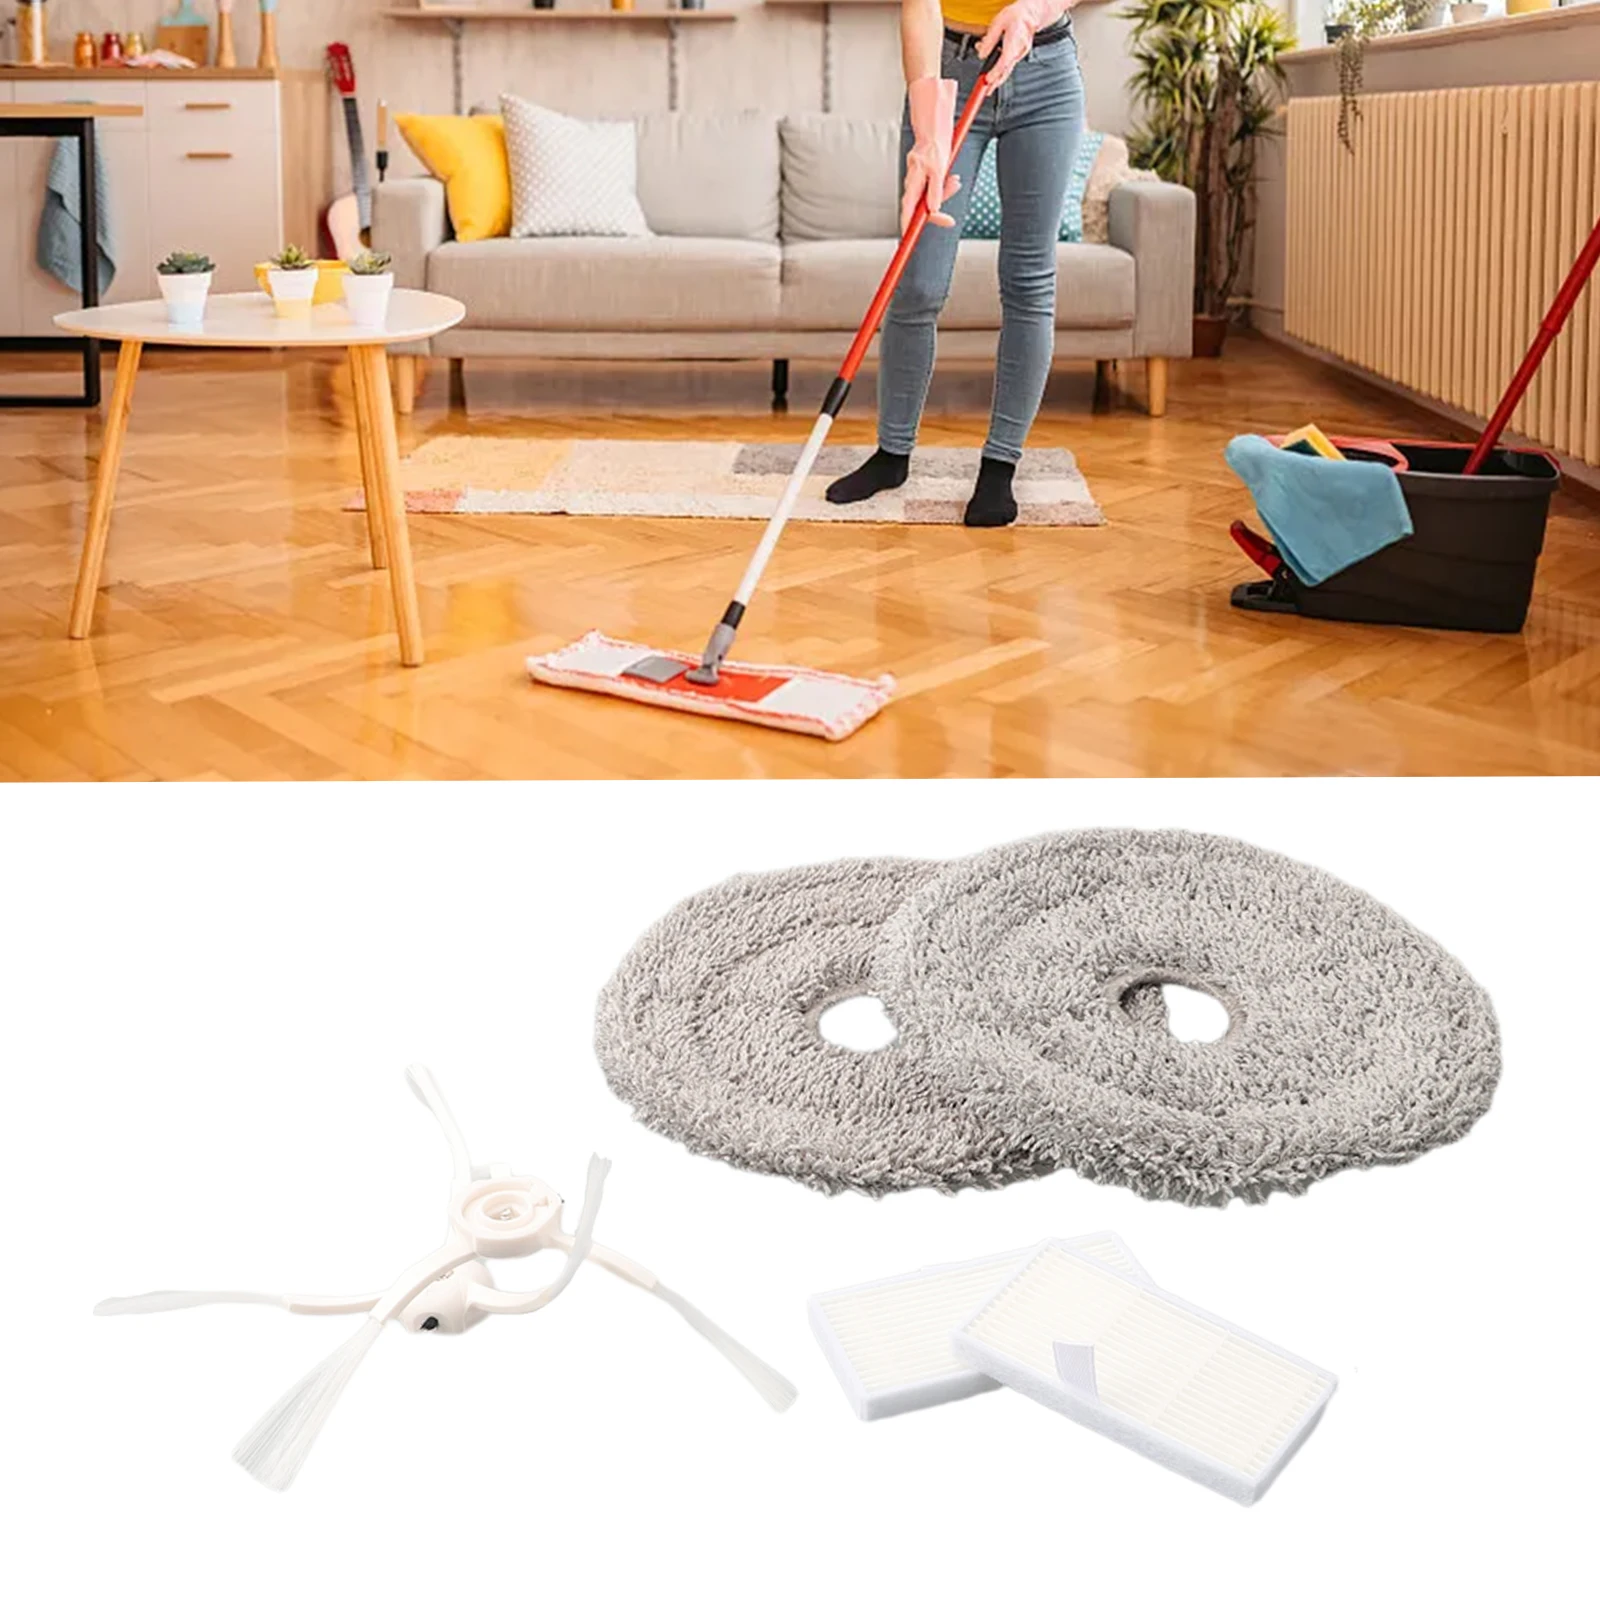 Vacuum Cleaner Accessories Set For Lydsto W2 Robot Cleaner Sweeper Replacement Side Brush Filter Mop Rag Cloth Parts replacement primary filter side brush mop cloth set for abir x6 x5 x8 robot vacuum cleaner household sweeper replace parts